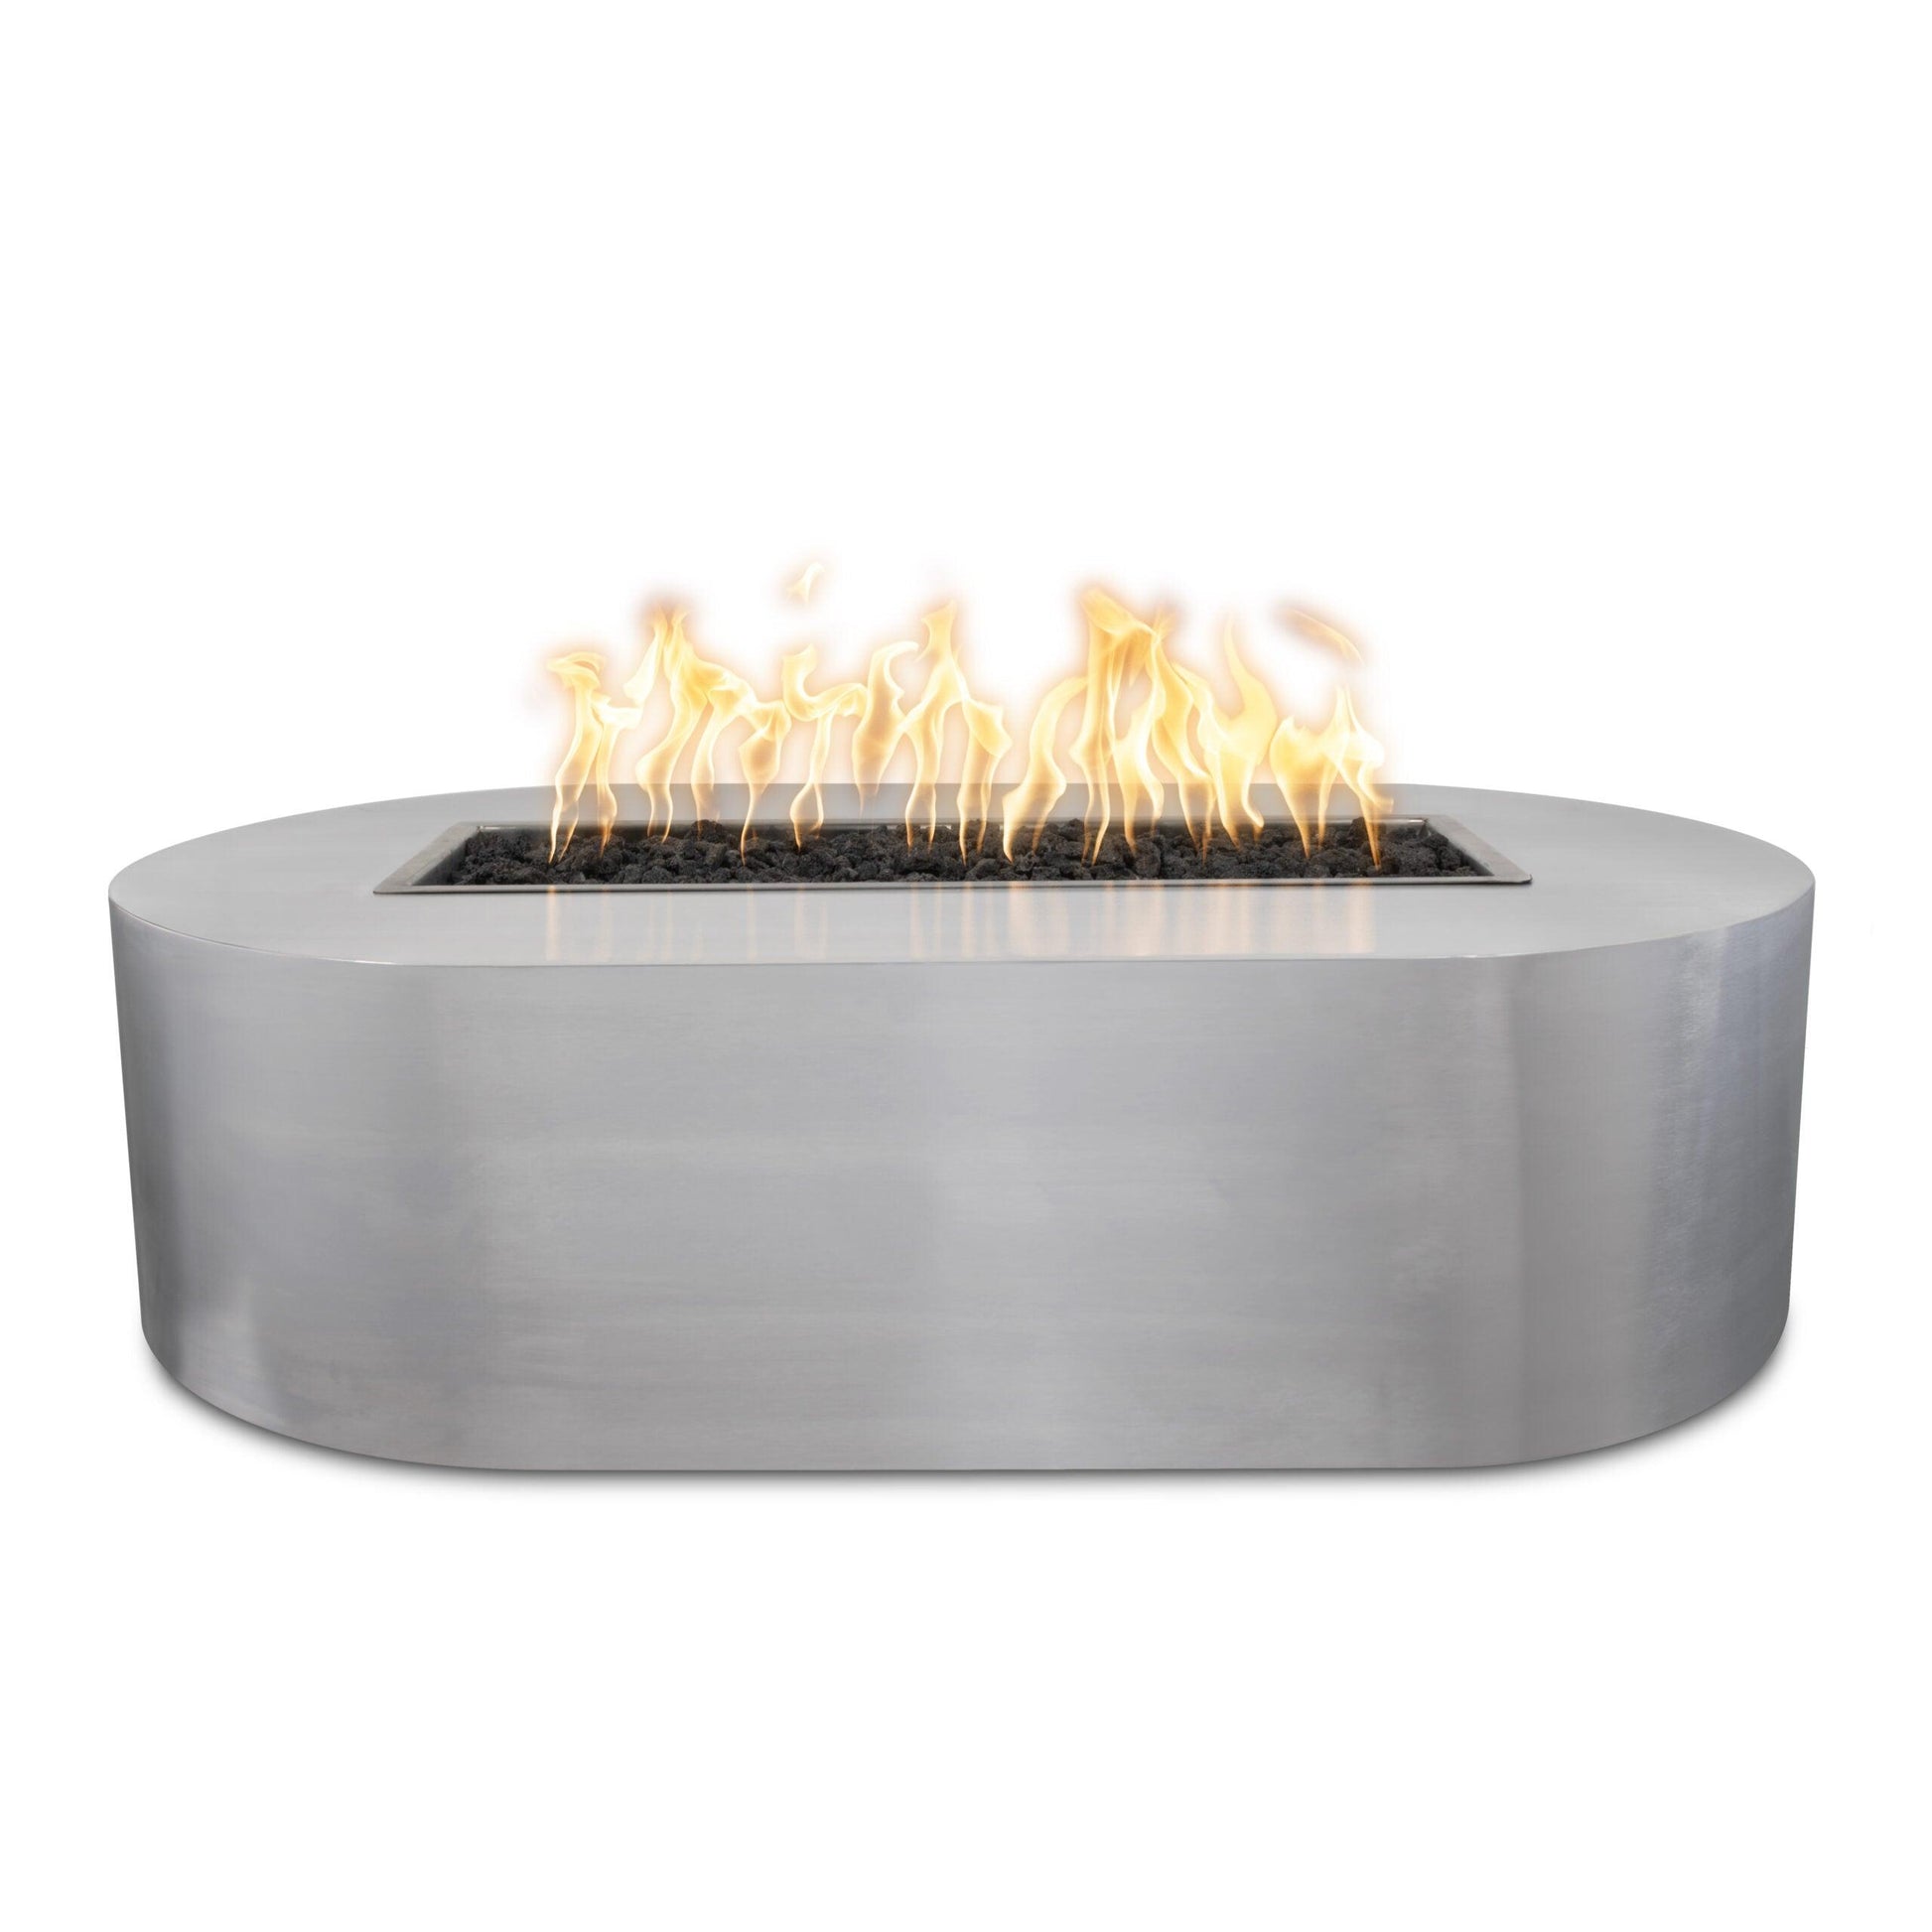 Bispo Fire Pit Stainless Steel scaled